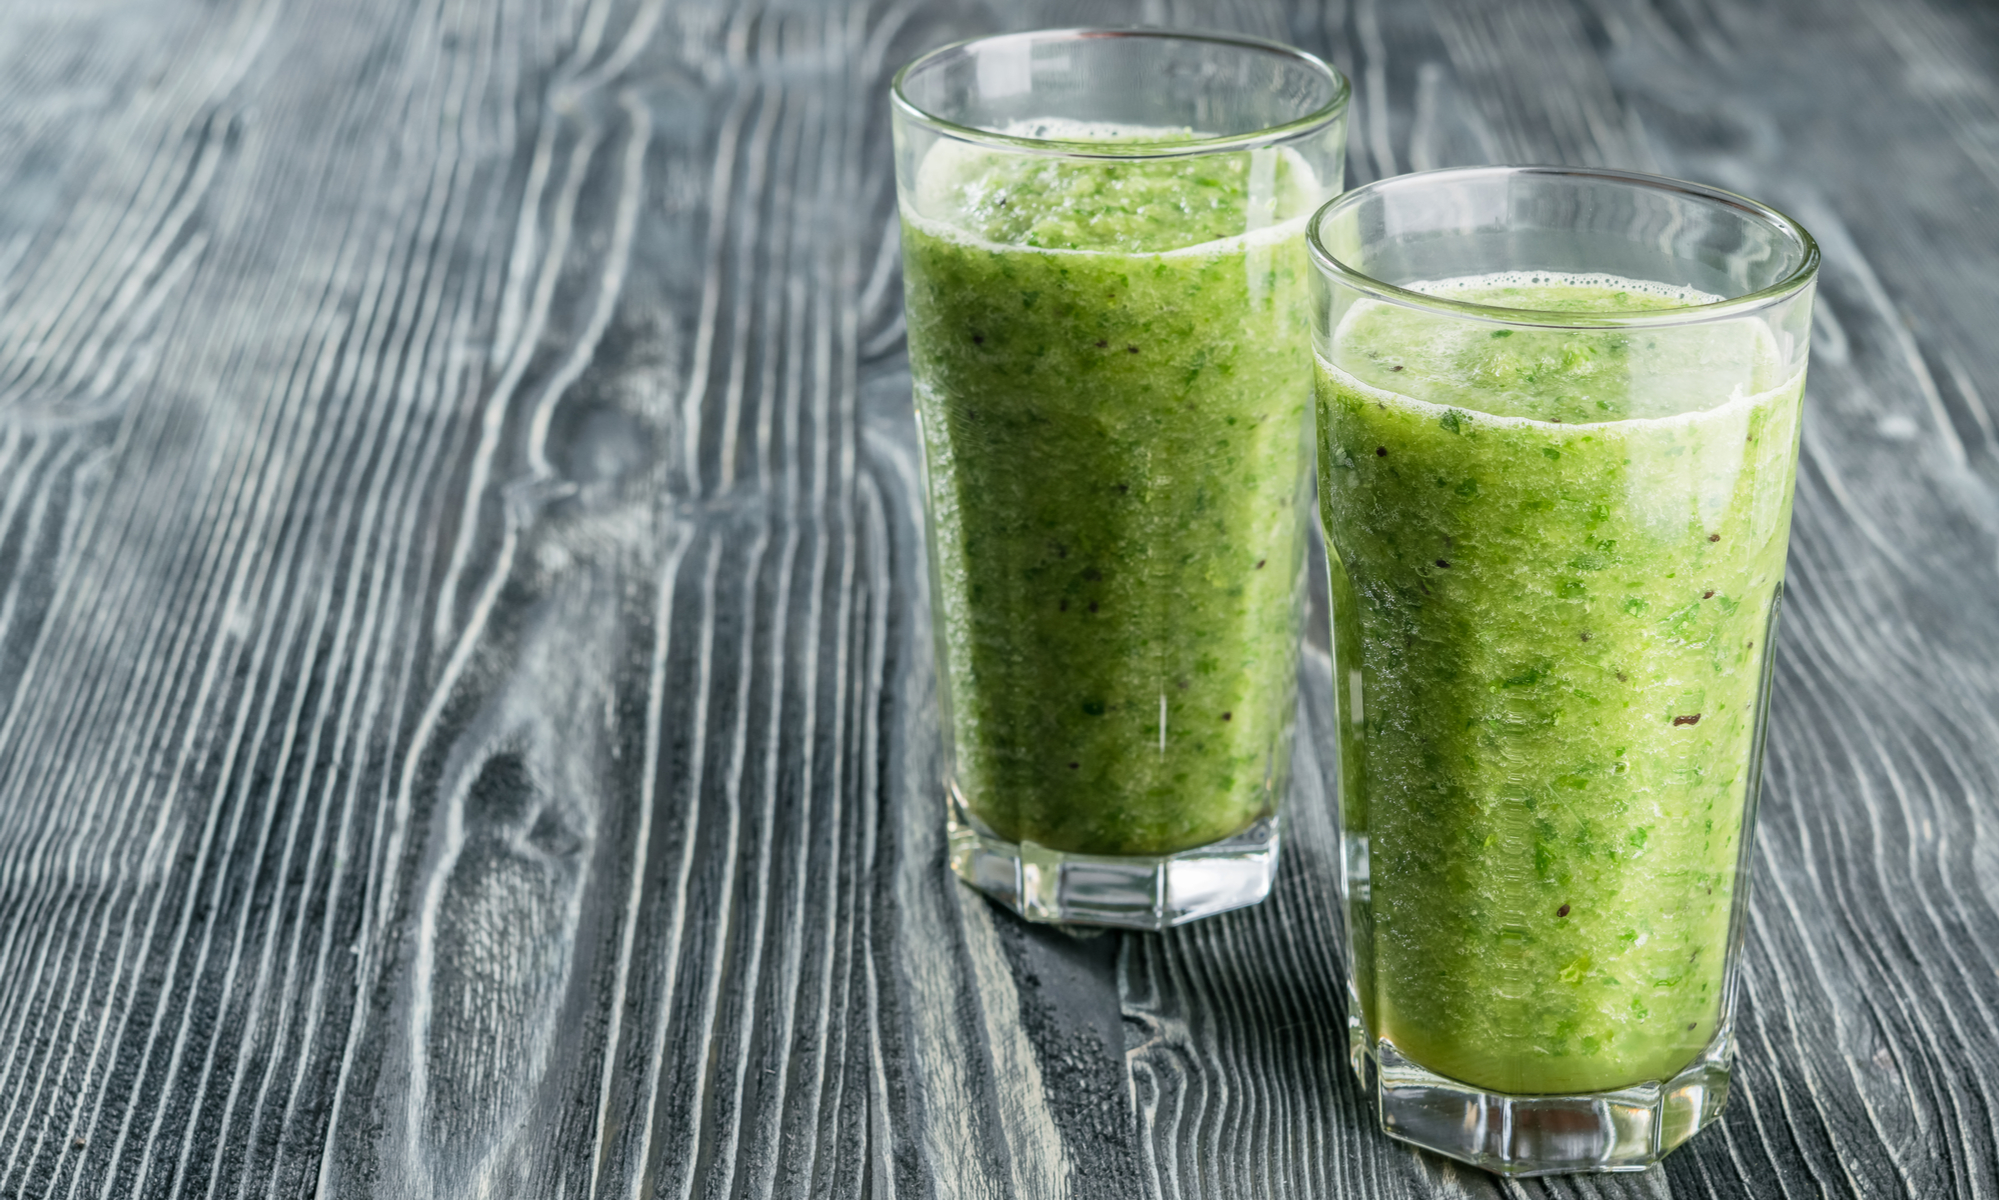 Craving A Reset? Try This Winter Green Smoothie Recipe